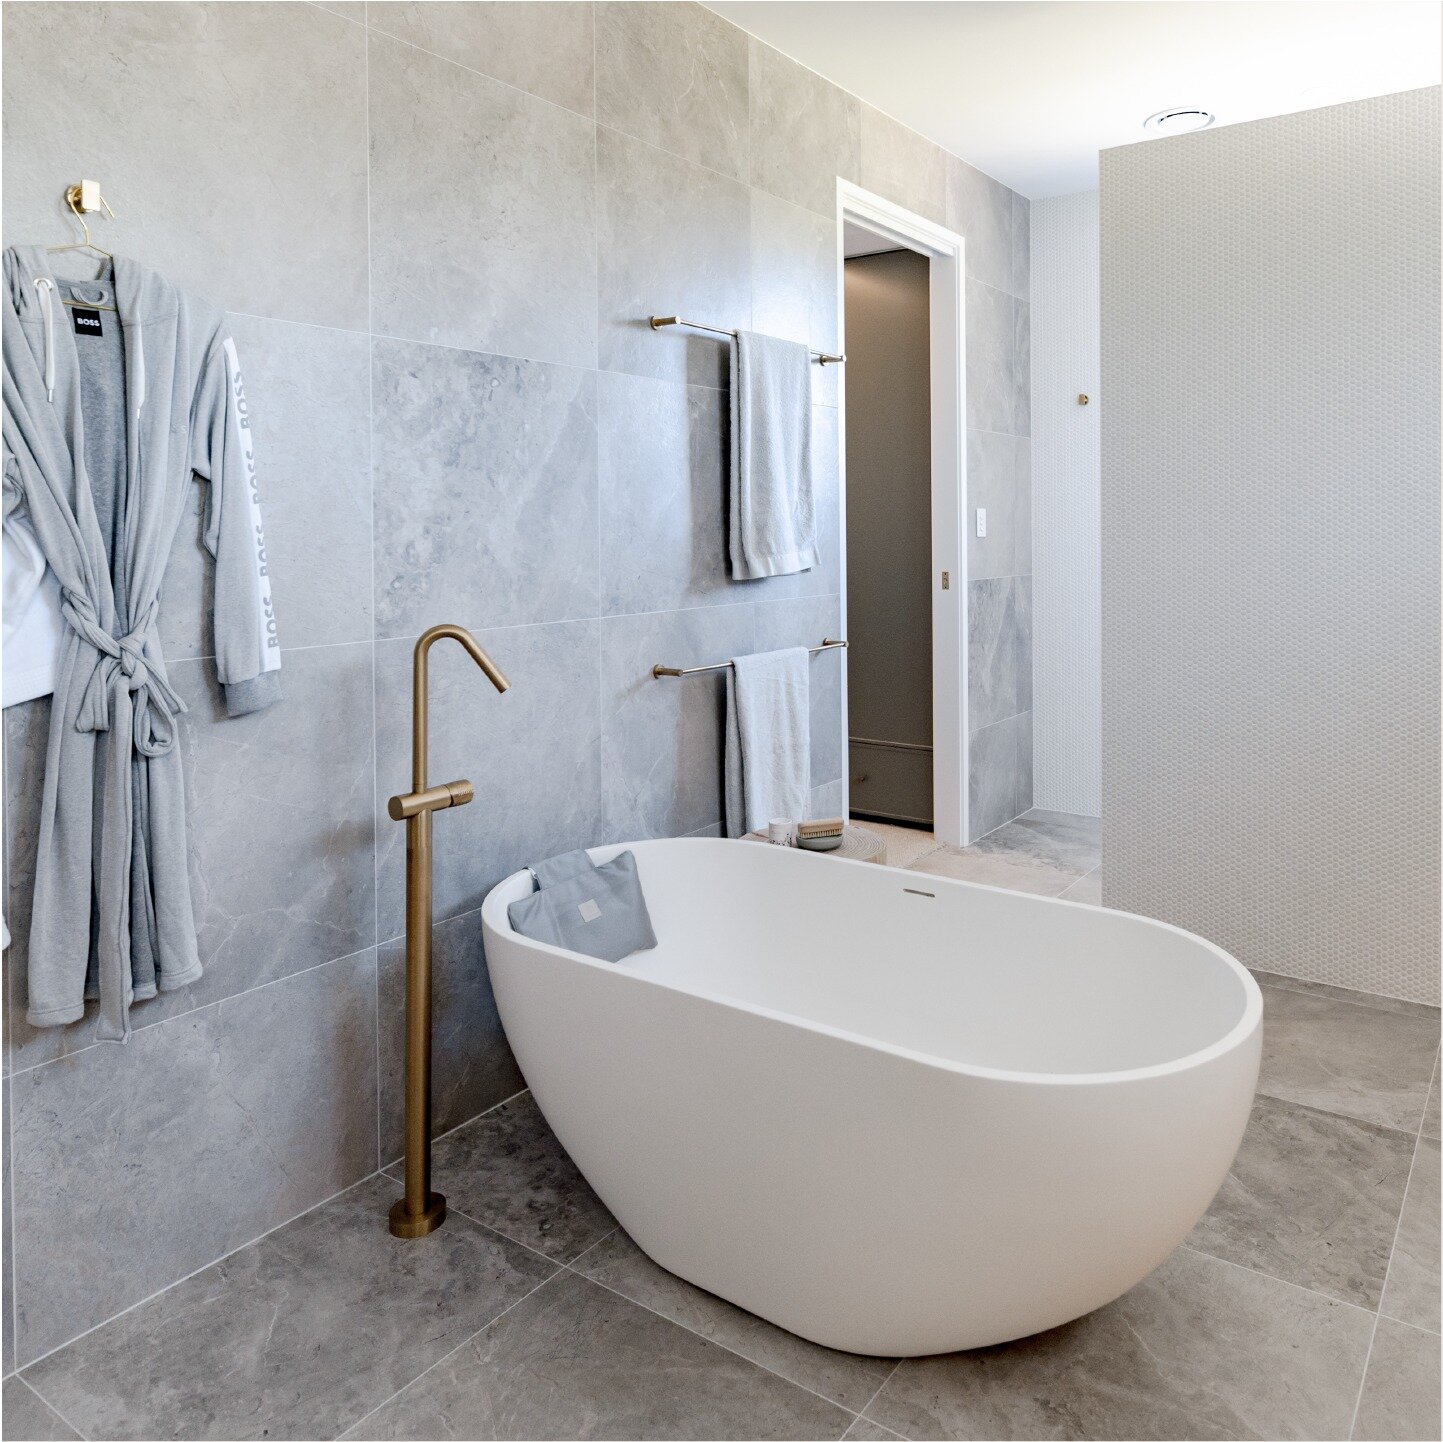 Ensuite elegance: your private spa oasis awaits, complete with a soothing standalone bath for ultimate relaxation and retreat 🙌🏼

#BathroomDesign #SpaRetreat #LuxuriousLiving #LatestProject #HomeDecor #RelaxationSpace #InteriorStyle #StoneTiles #Br